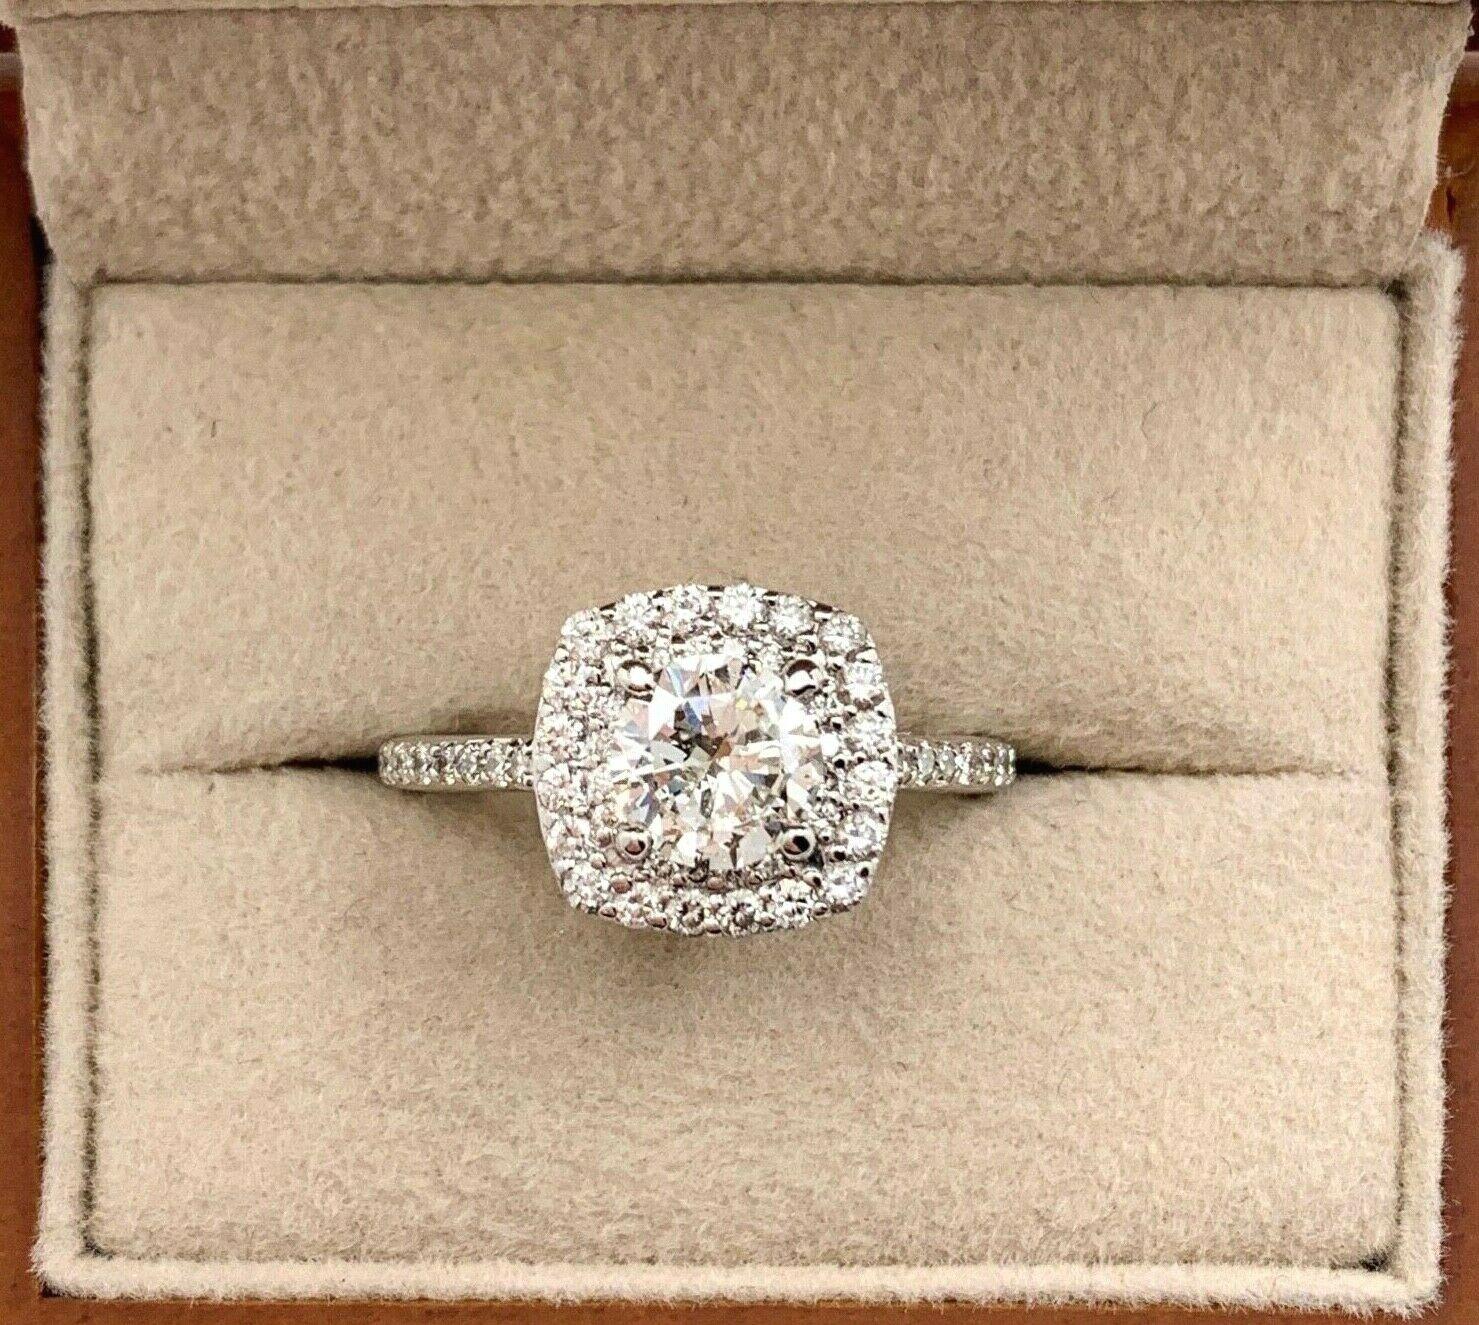 Round Brilliant Diamond Engagement Ring

Style:  Double Halo
Metal:  14K White Gold
Size / Measurements:  Ring Size 6.5
TCW:  1.31 Carats Total
Main Diamond:  0.86 Carat Round Brilliant Cut
Color & Clarity:  G Color,  I1 Clarity
Accent Diamonds:  53